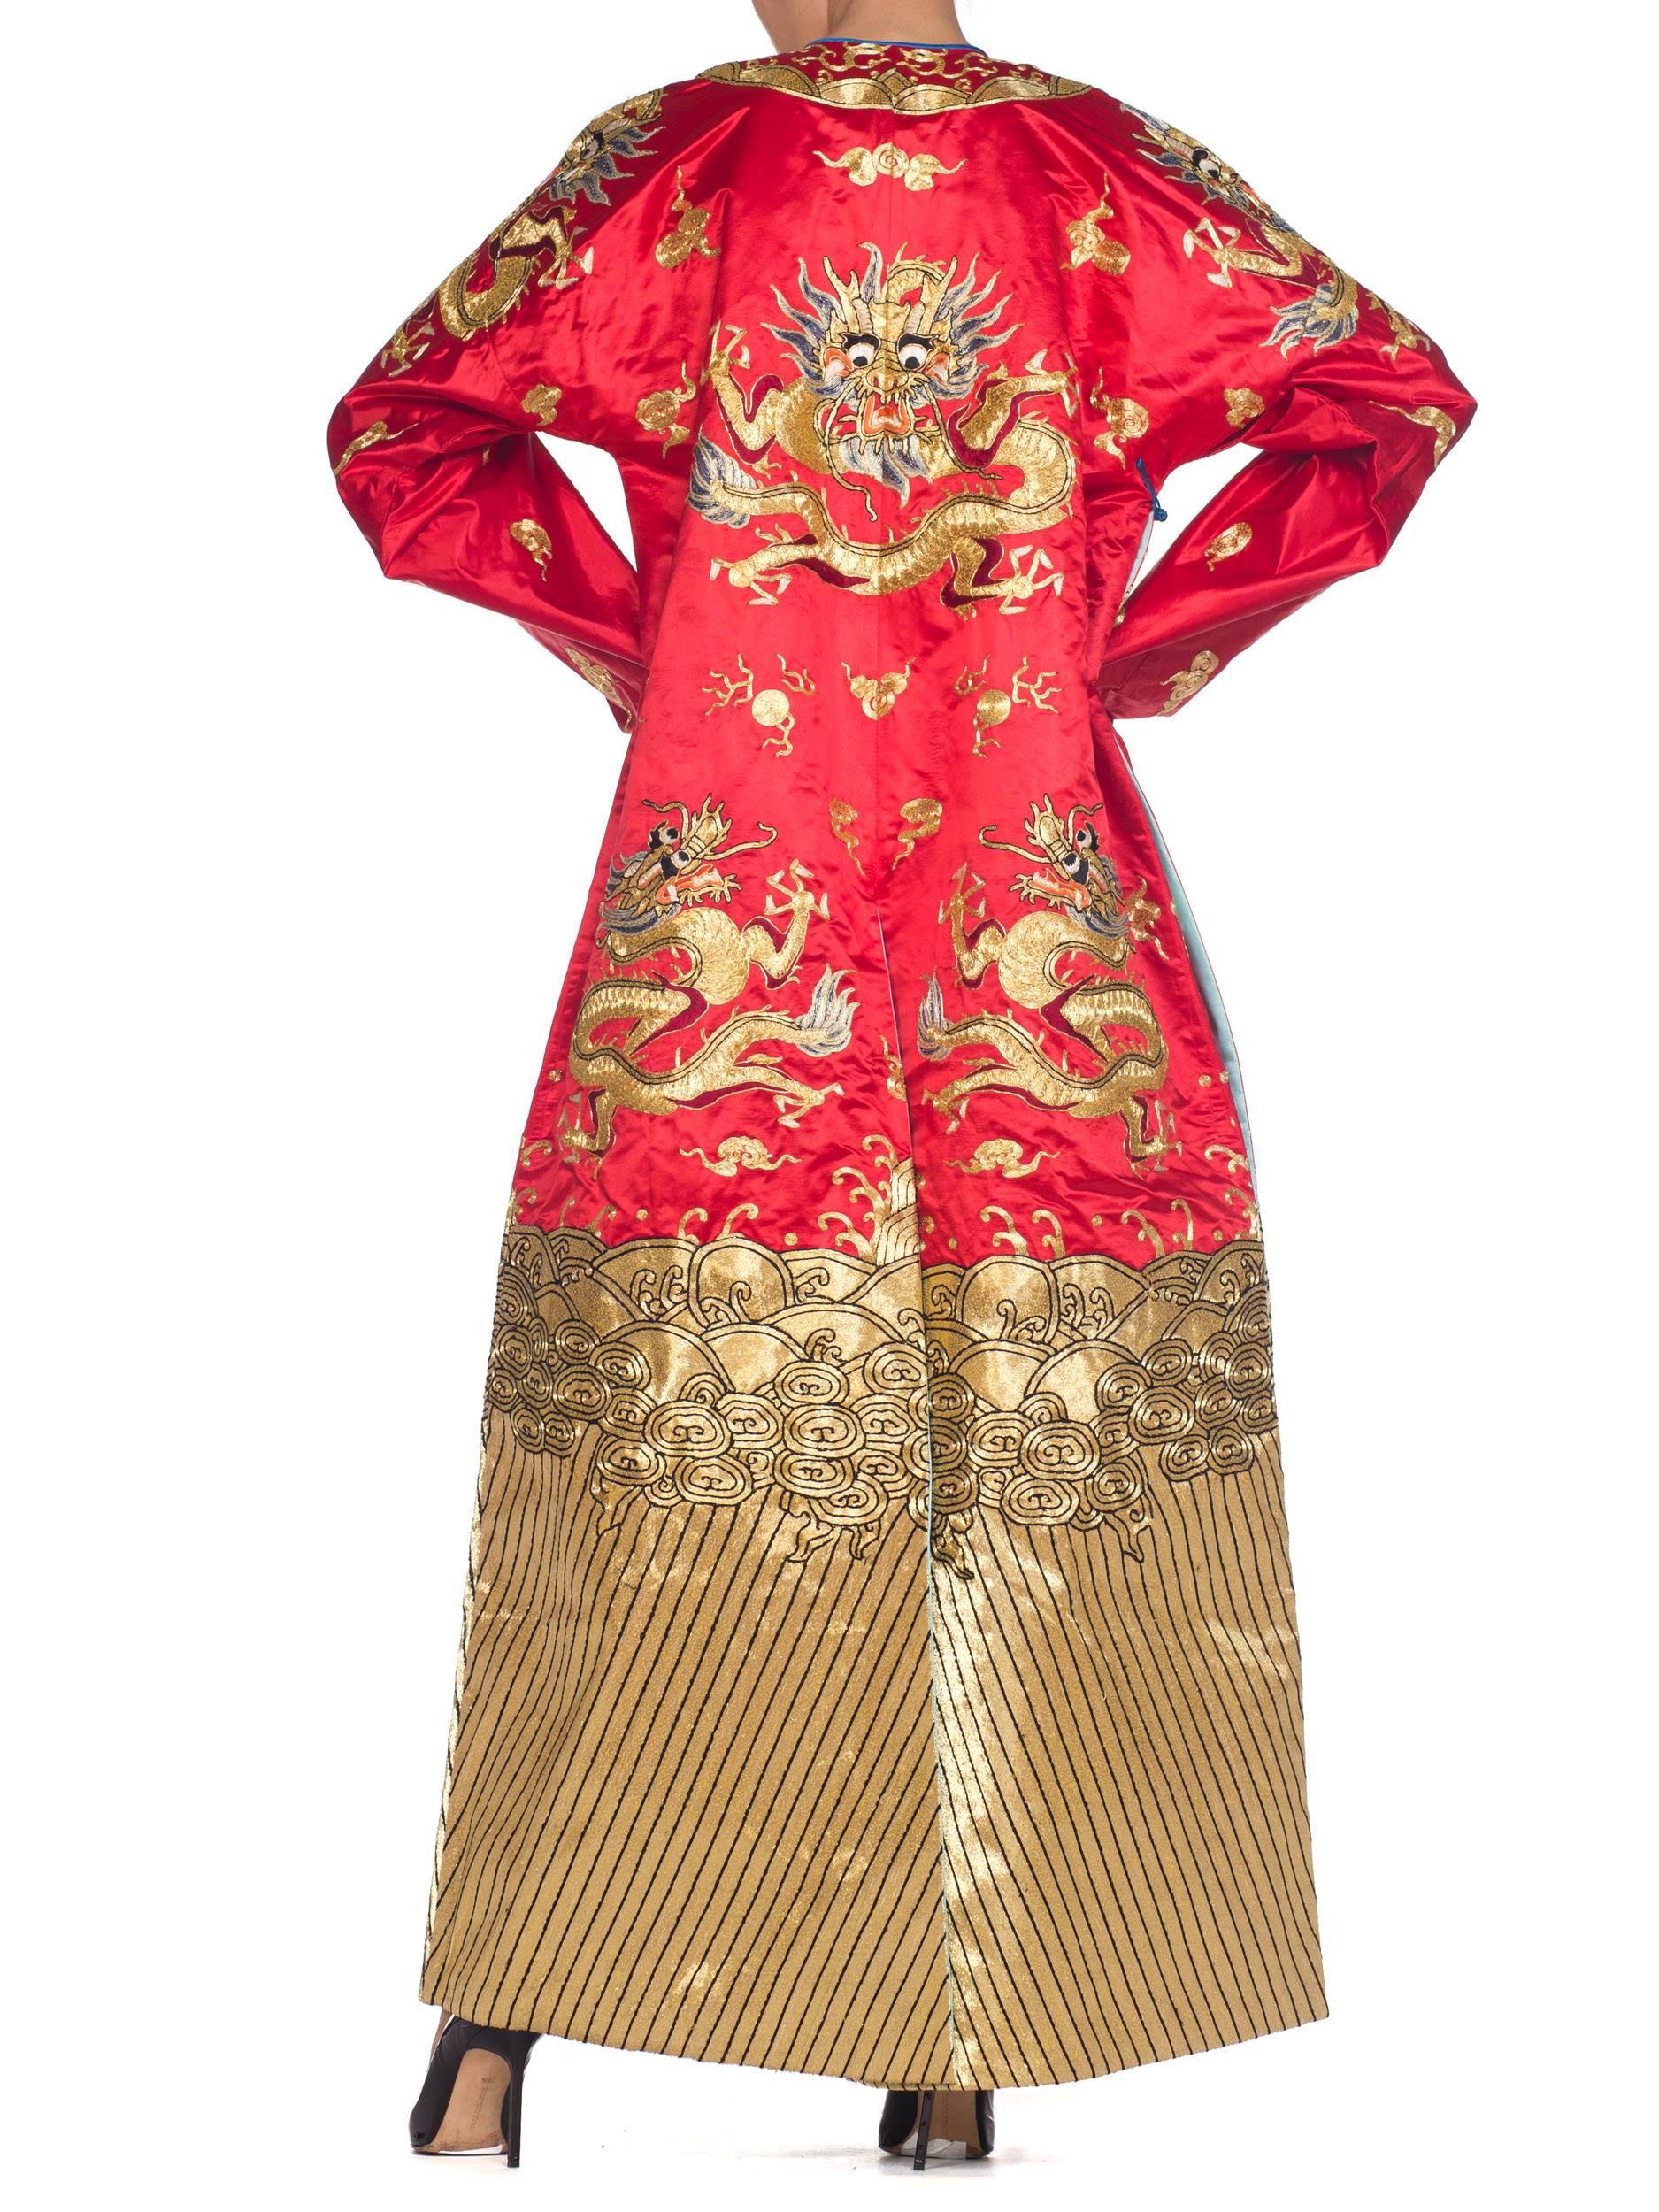 Women's 1950S Metallic Golden Dragons Embroidered Red Chinese Opera  KimonoRobe For Sale